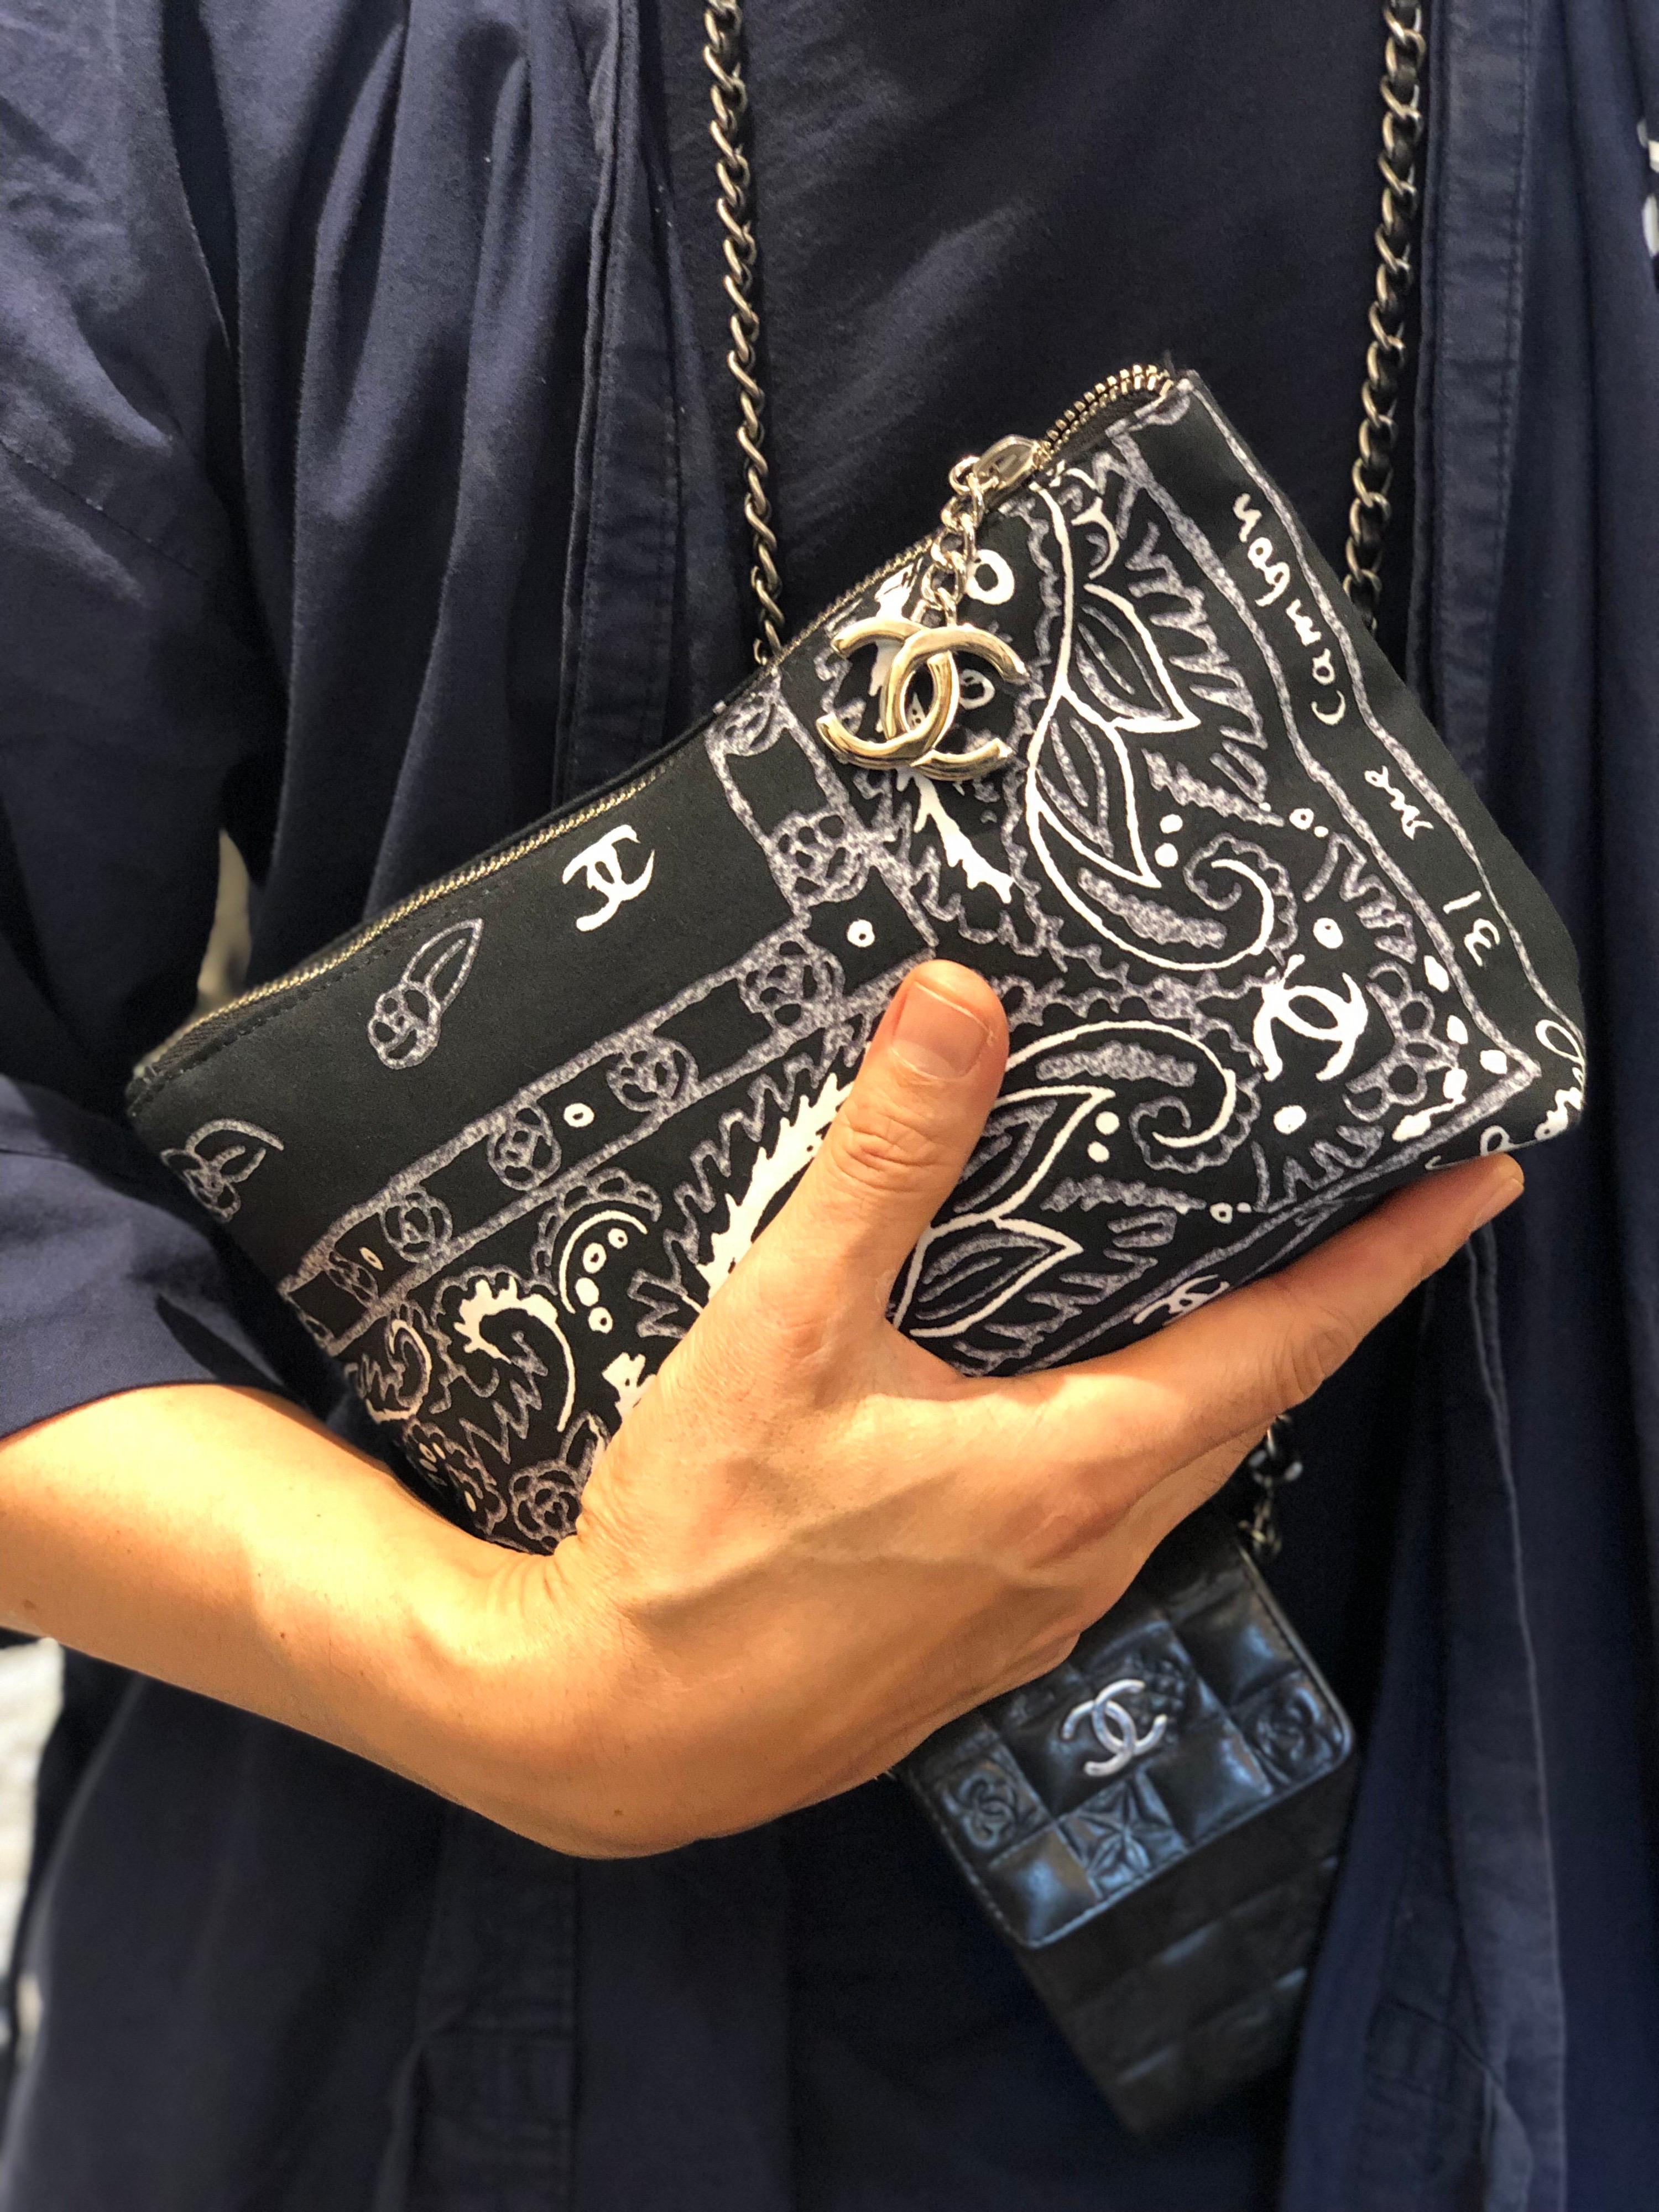 This 2000s Chanel cotton cosmetic pouch/clutch is crafted of cotton in black and white paisley prints featuring silver toned hardware. Top zipper closure opens to a black terry cloth interior featuring patch pocket. A small ring is added to the end